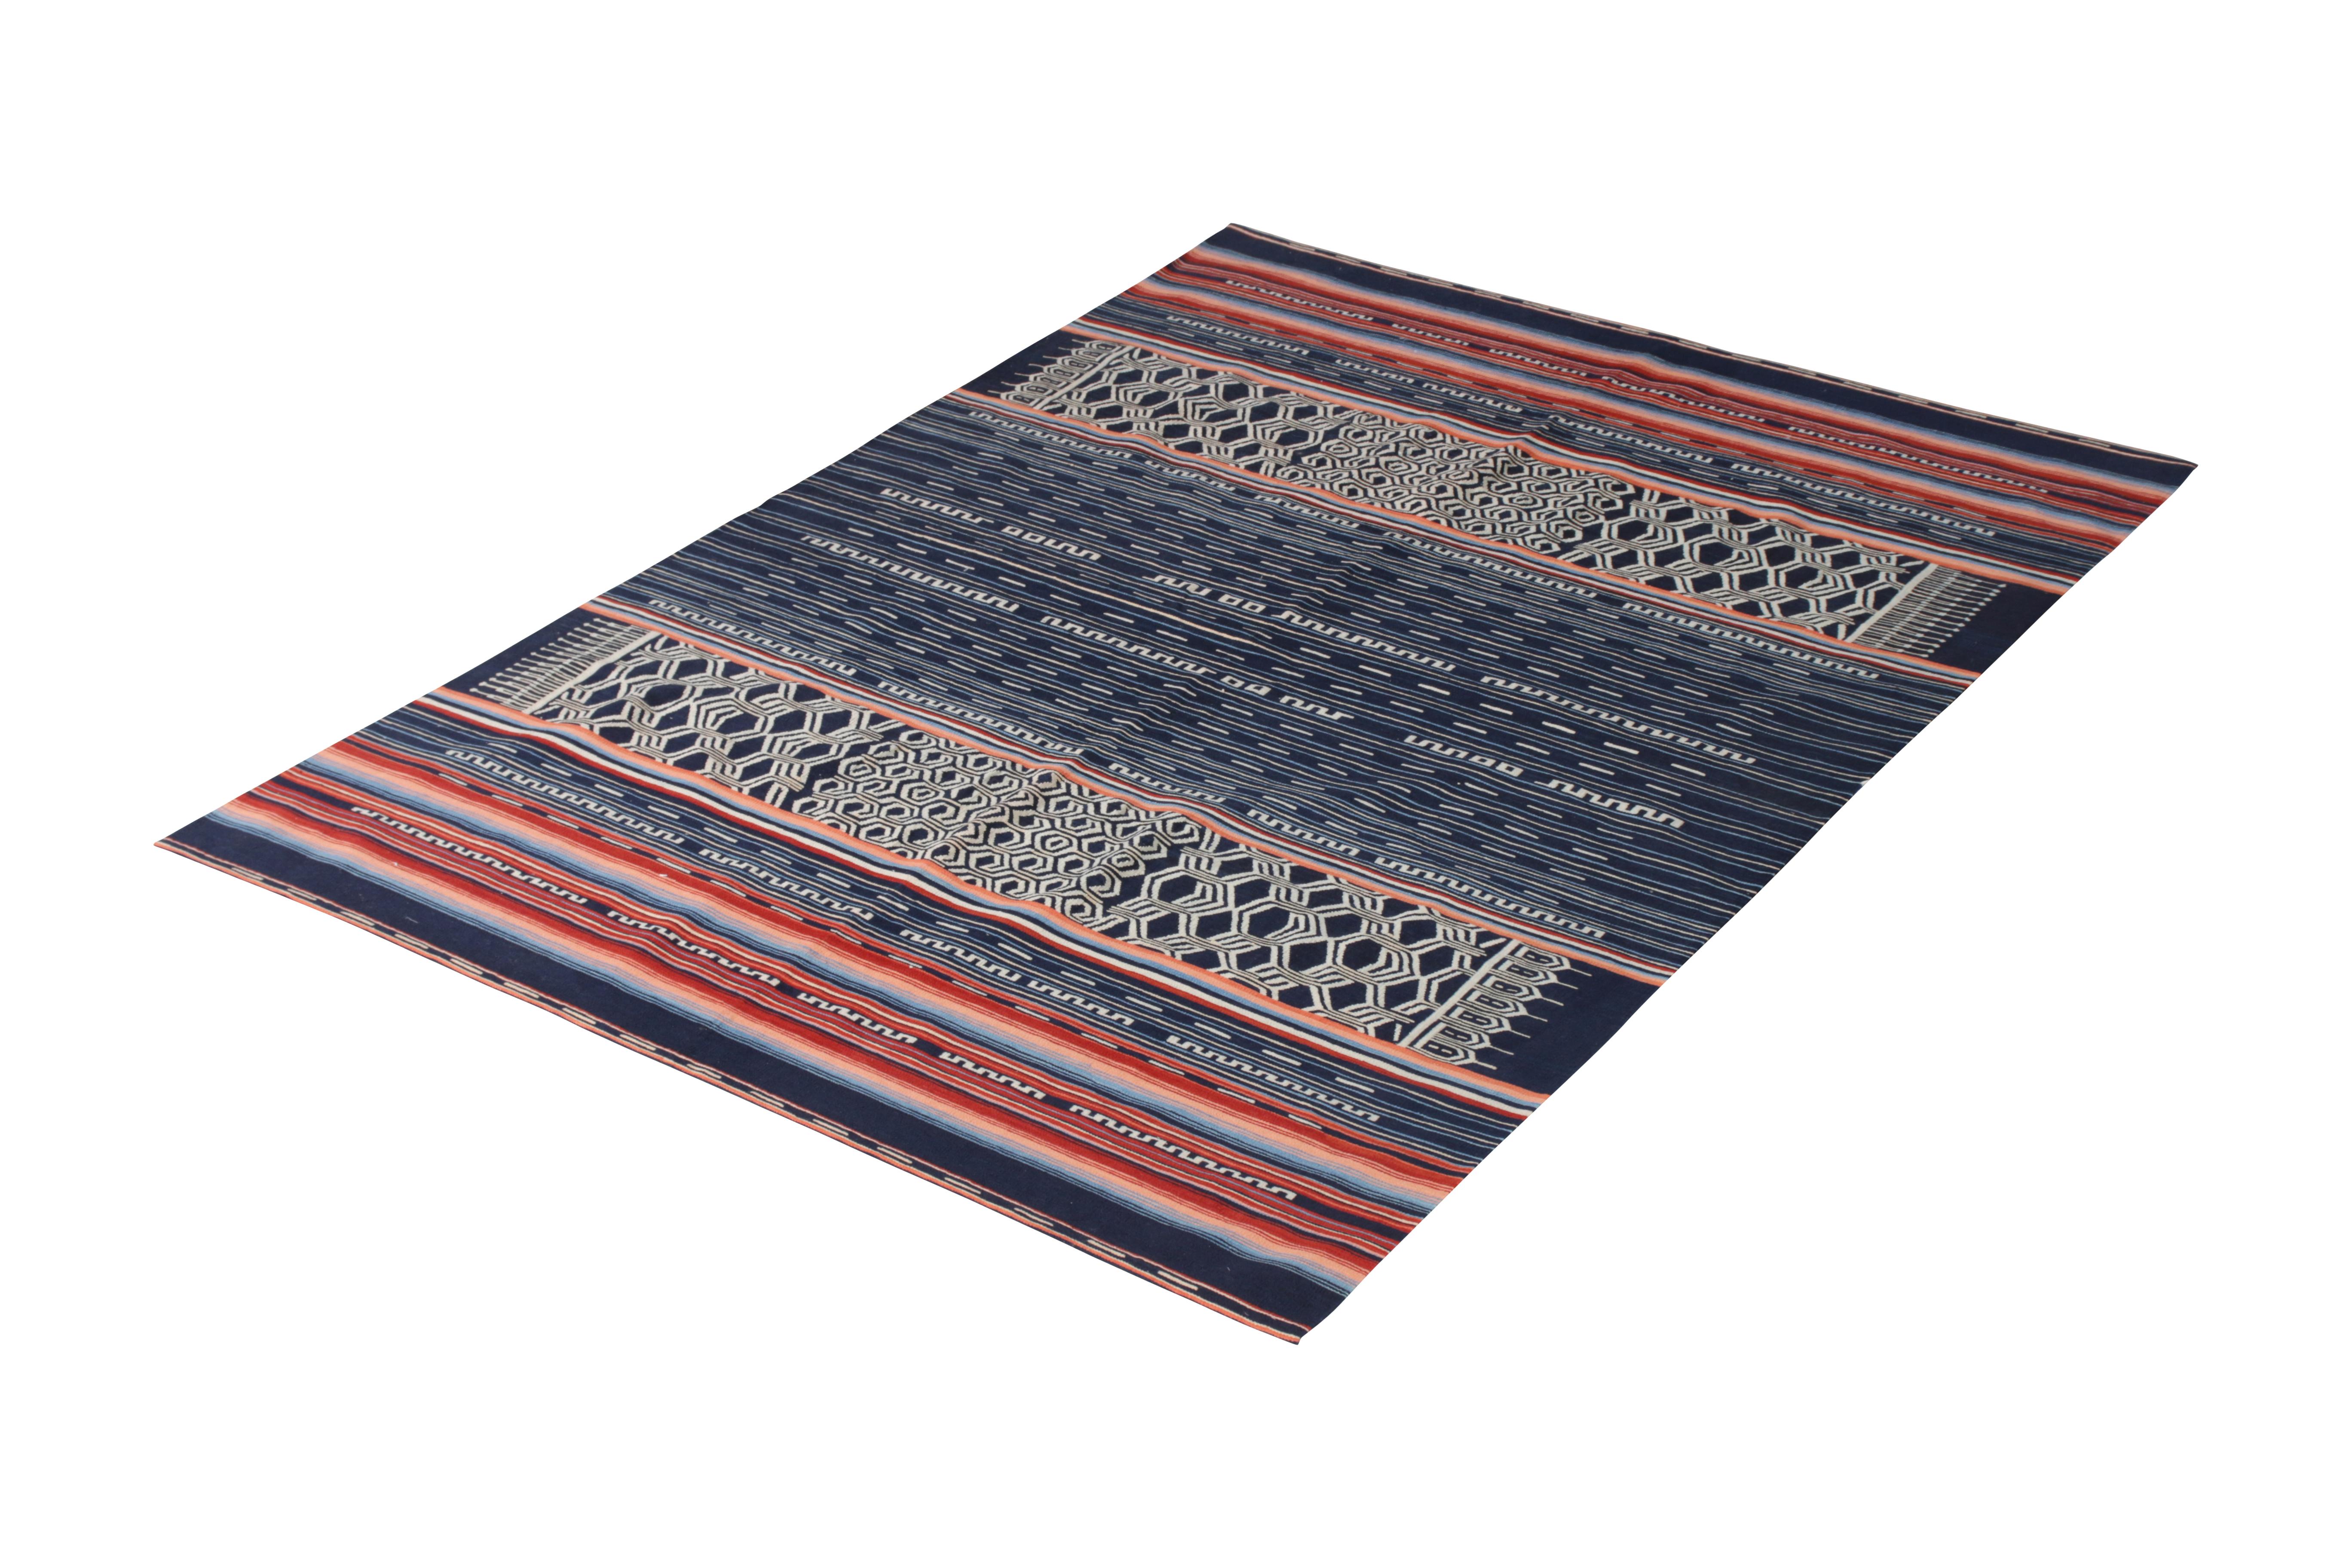 An unveiling from the modern Kilim selections in the Kilim & flat-weave collection from Rug & Kilim-here celebrating a 6 x 8 Kilim from the works of Teddy Sumner-handmade in a wool flat-weave in this distinctive take on Art Deco style and good